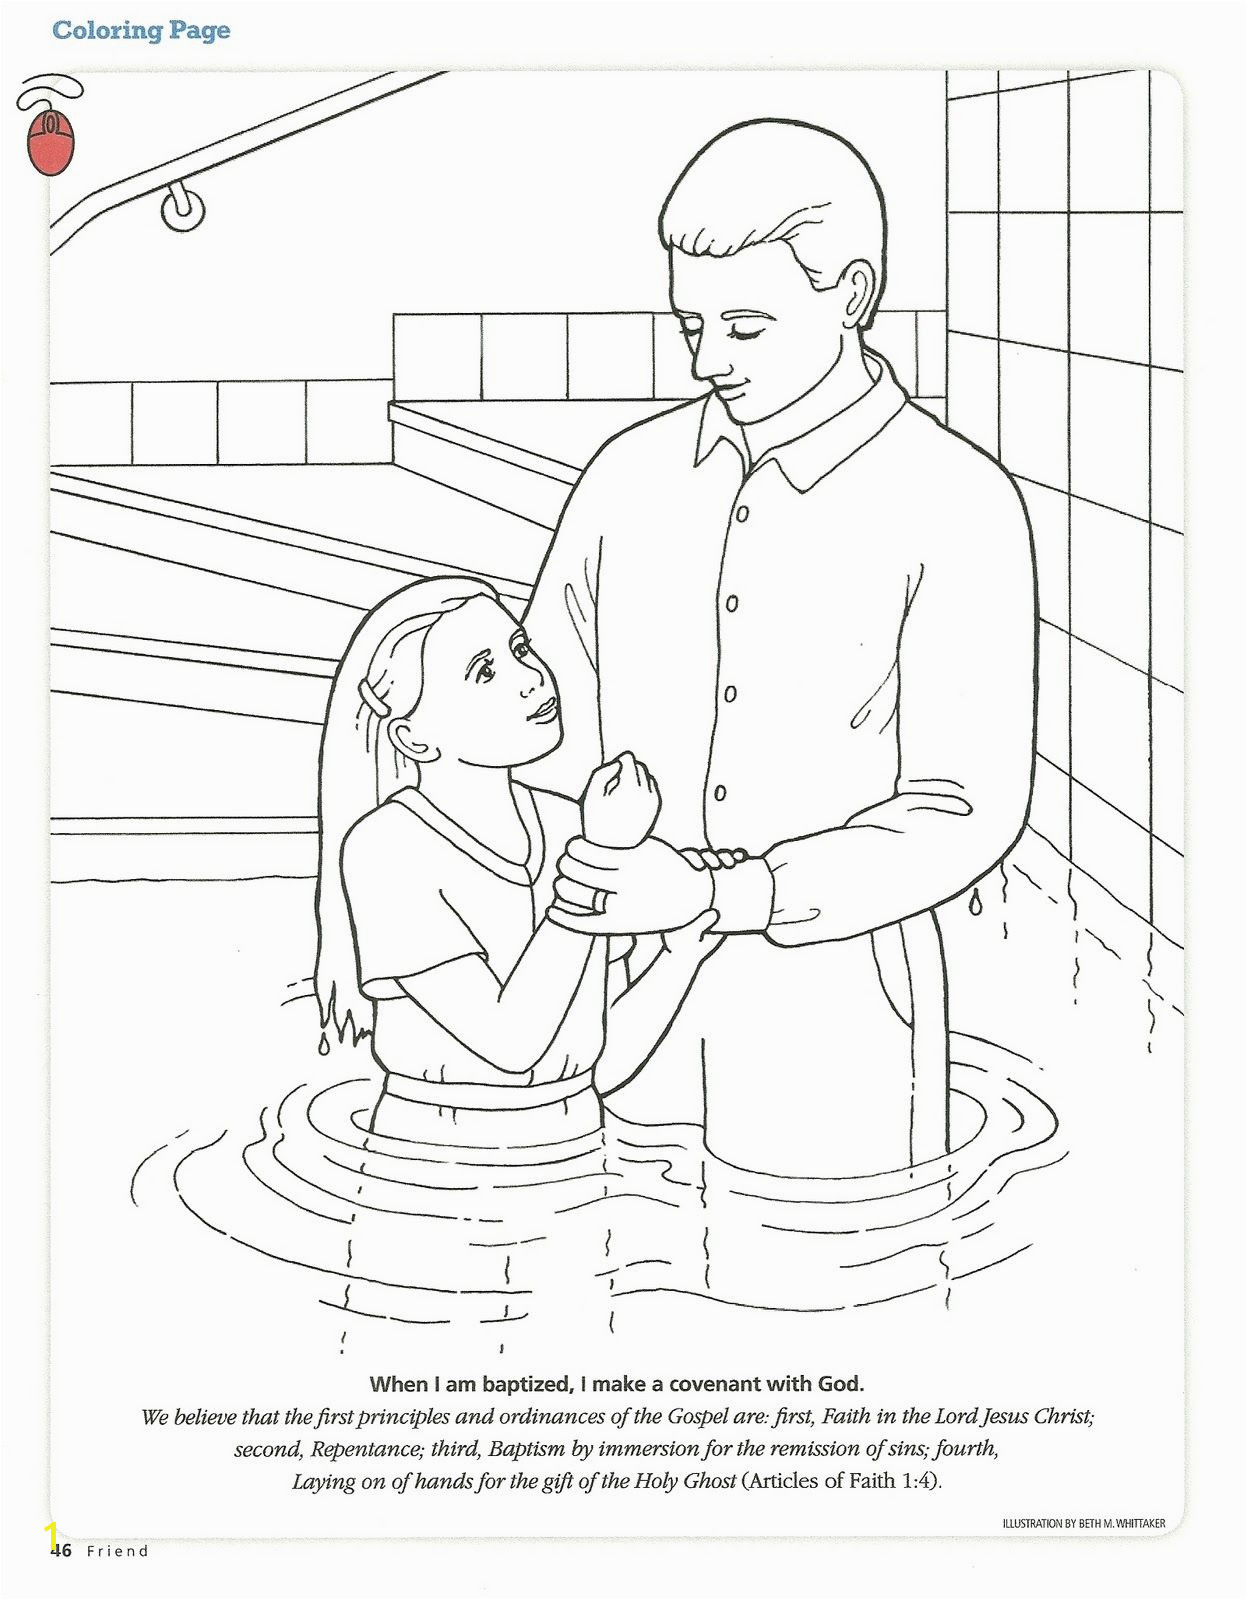 Jesus Getting Baptized Coloring Page Helping Others Coloring Pages